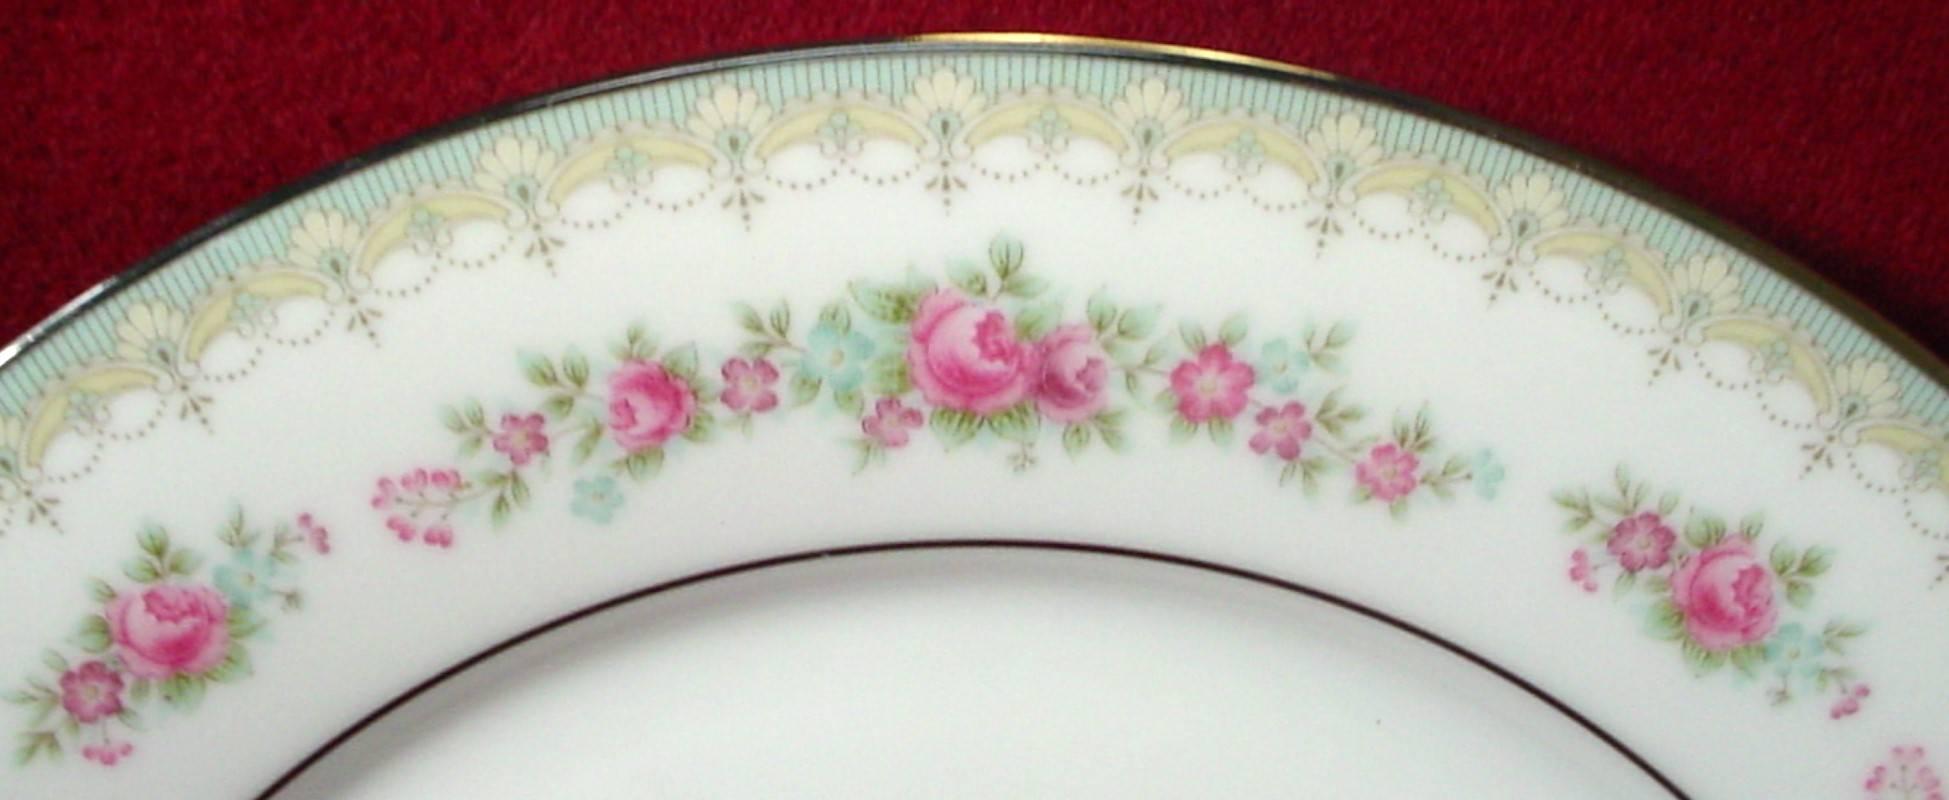 Noritake china Roselane 3093 pattern 84-piece, set. Service for 12.

In great condition free from chips, cracks, break, stain, or discoloration and with only a minimum of use. 

Production dates: 1980-1985. 

Includes 12 each cup, saucer,